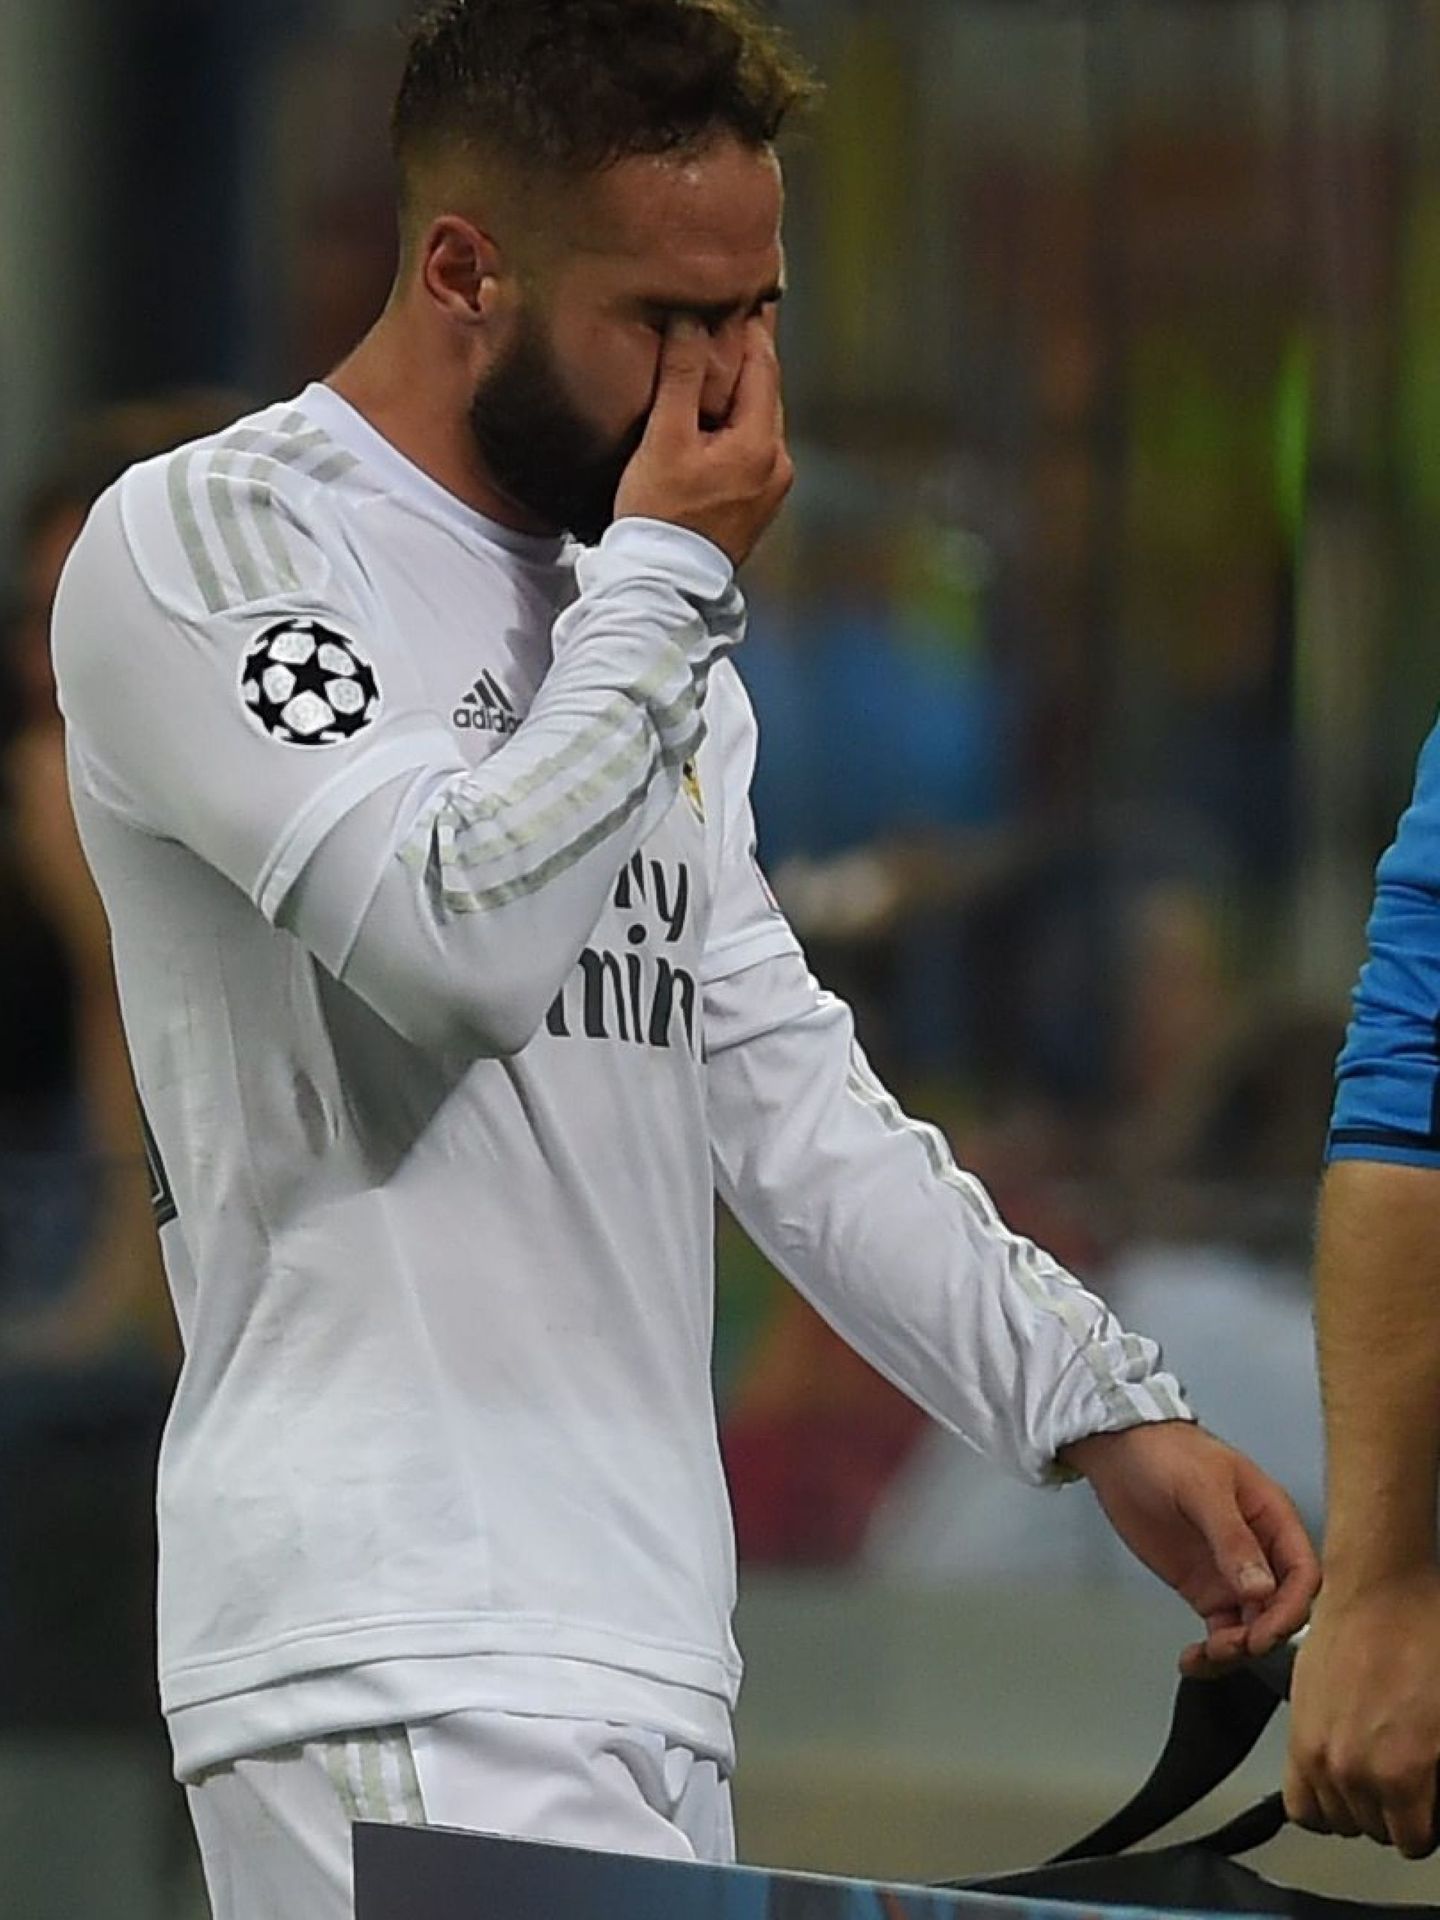 . Milan (Italy), 28 05 2016.- Real Madrid player Dani Carvajal reacts after being substituted during the UEFA Champions League Final between Real Madrid and Atletico Madrid at the Giuseppe Meazza stadium in Milan, Italy, 28 May 2016. (Liga de Campeones, Italia) EFE EPA PETER POWELL